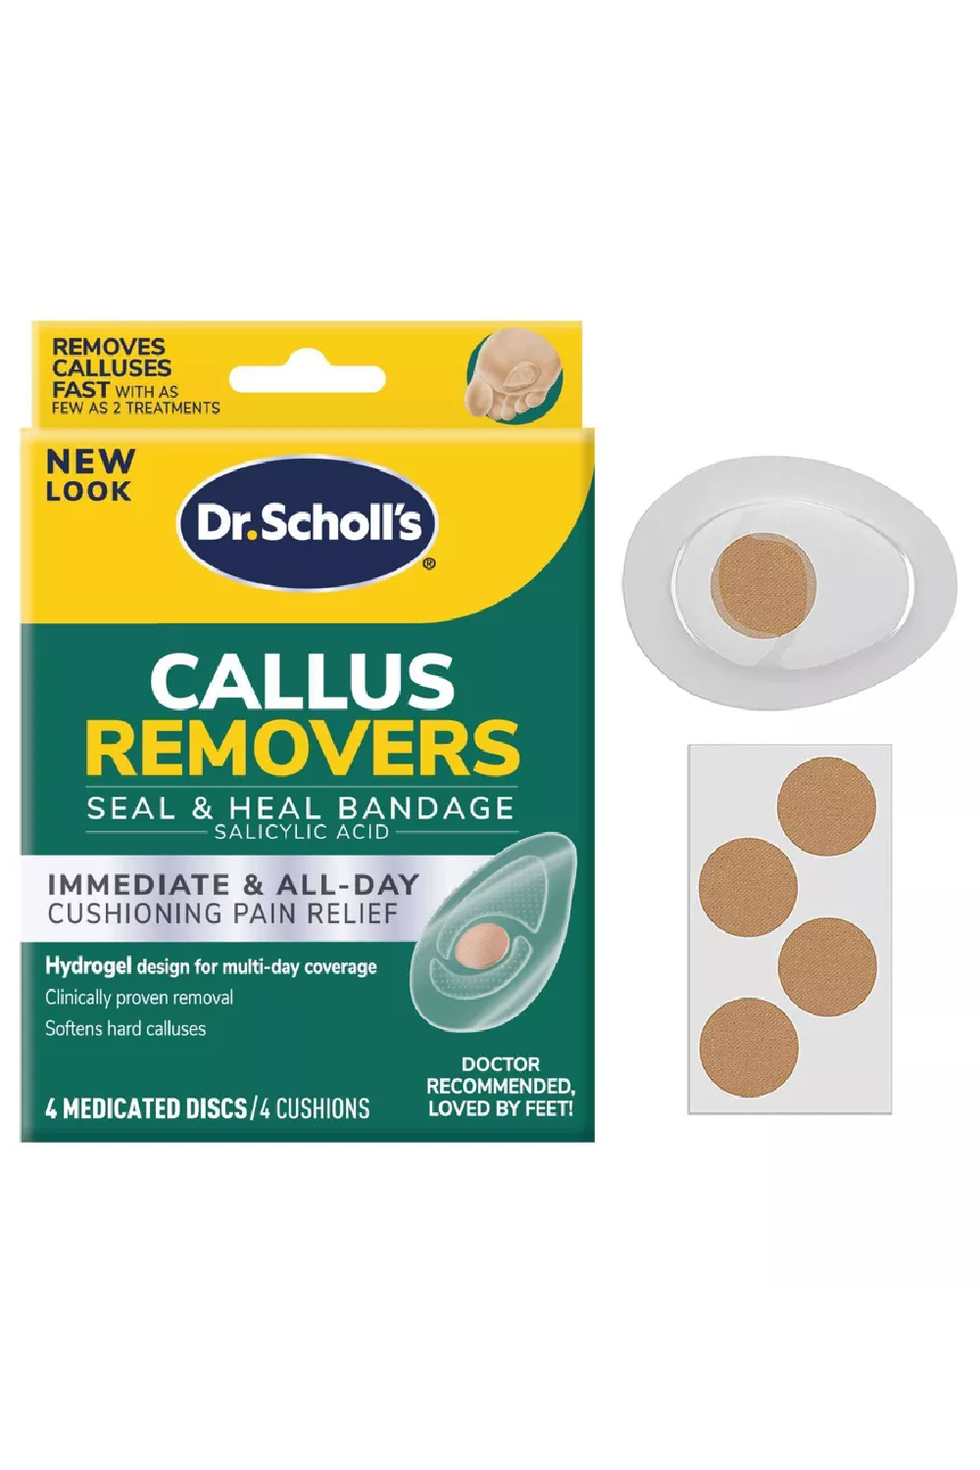 PRE-ORDER] Lee Beauty Professional Callus Remover Extra Strength